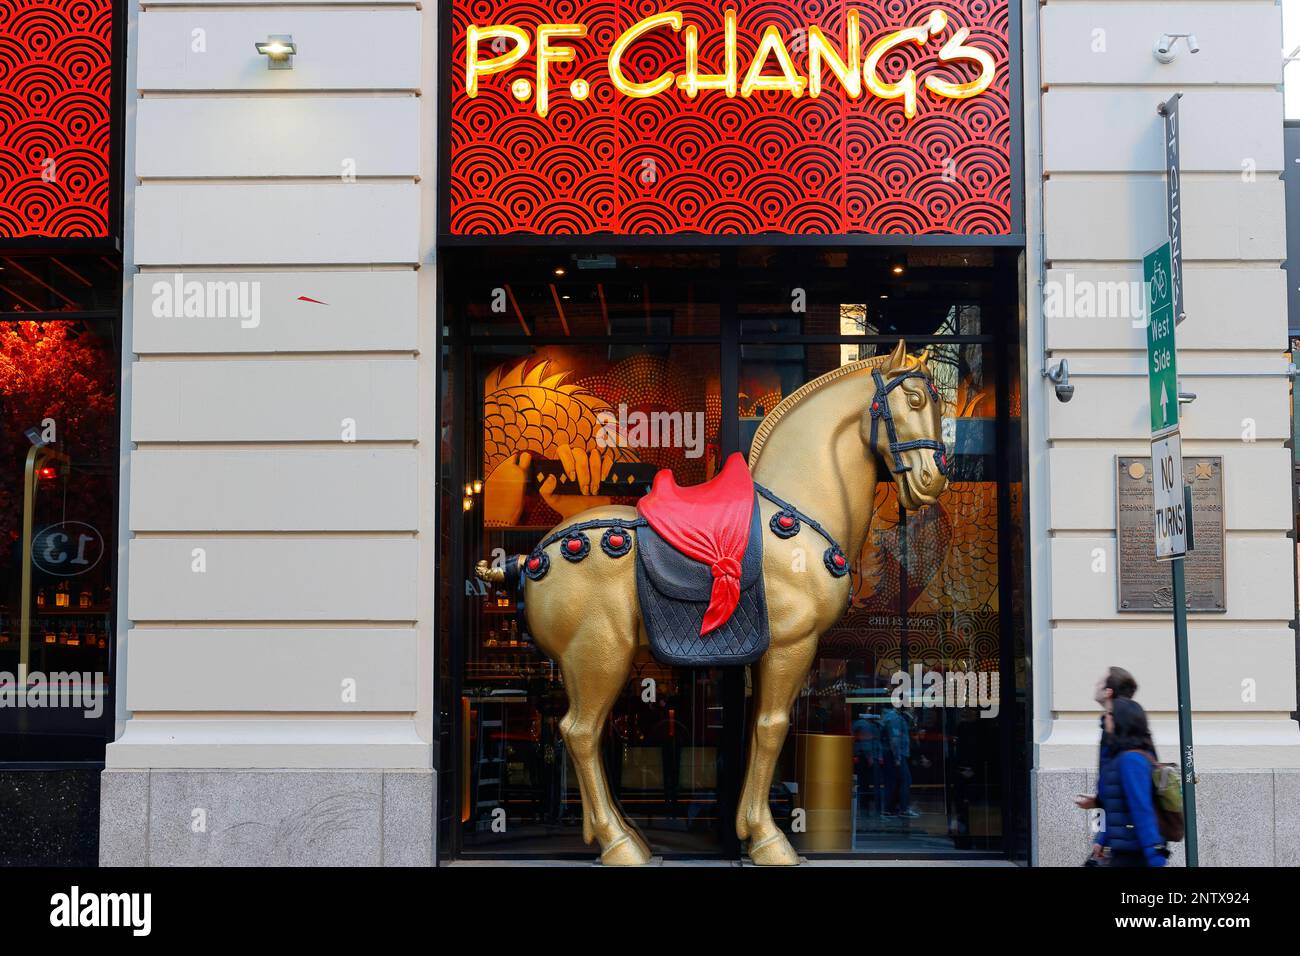 People walk past a large horse statue outside the P.F. Changs, 113 University Pl, New York location in Manhattan's Greenwich Village neighborhood. Stock Photo